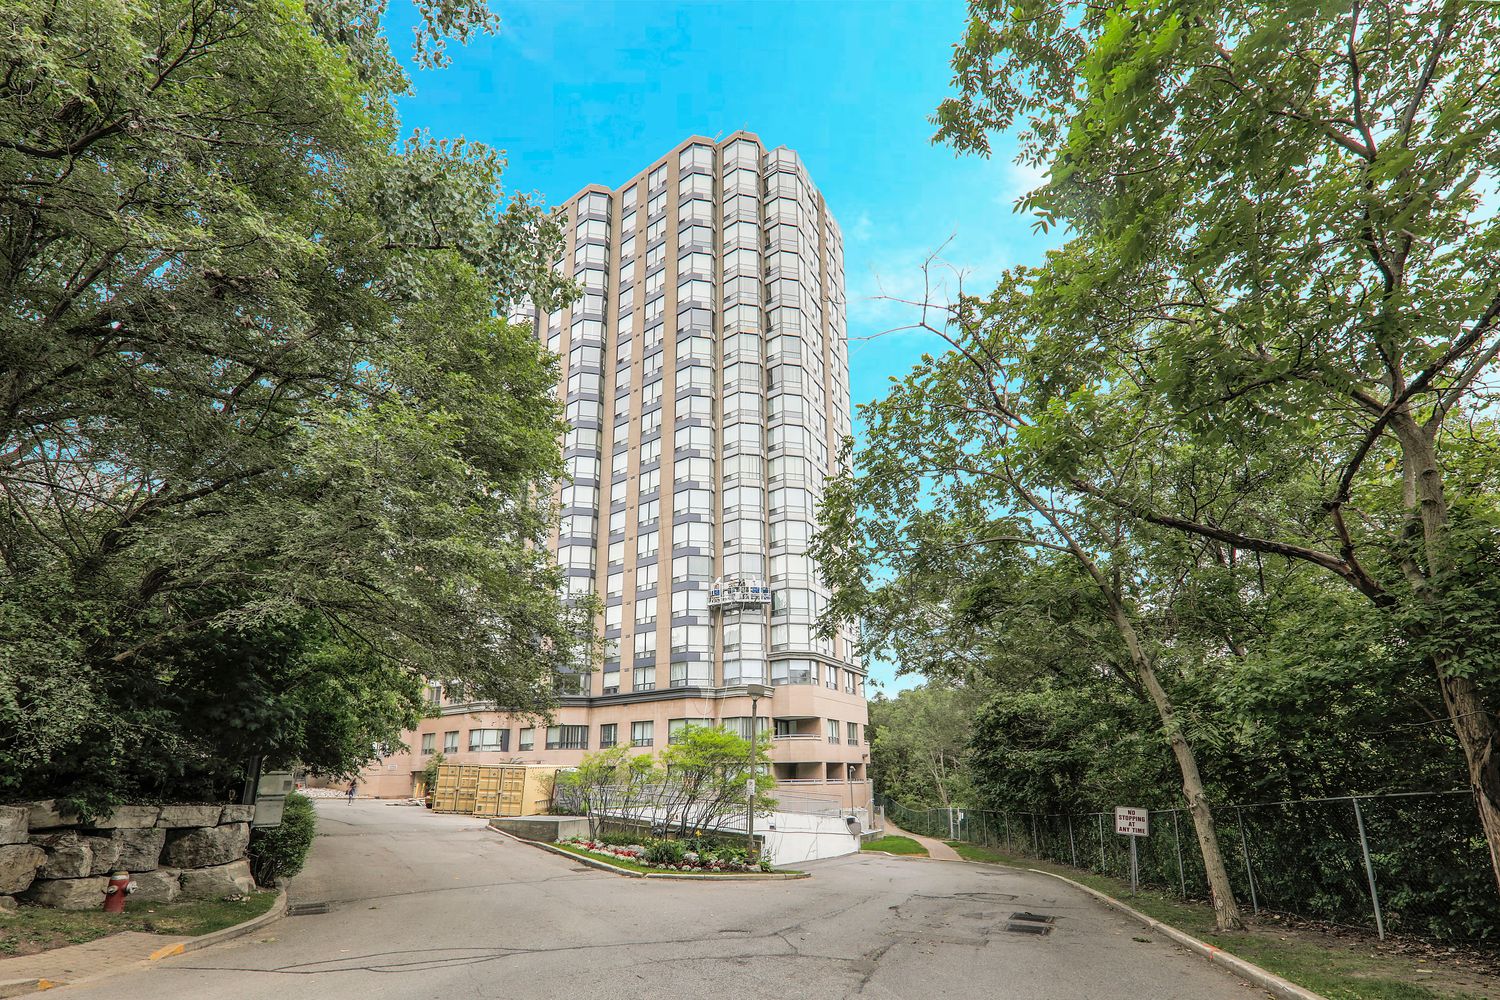 1 Hickory Tree Road. River Ridge is located in  York Crosstown, Toronto - image #2 of 6